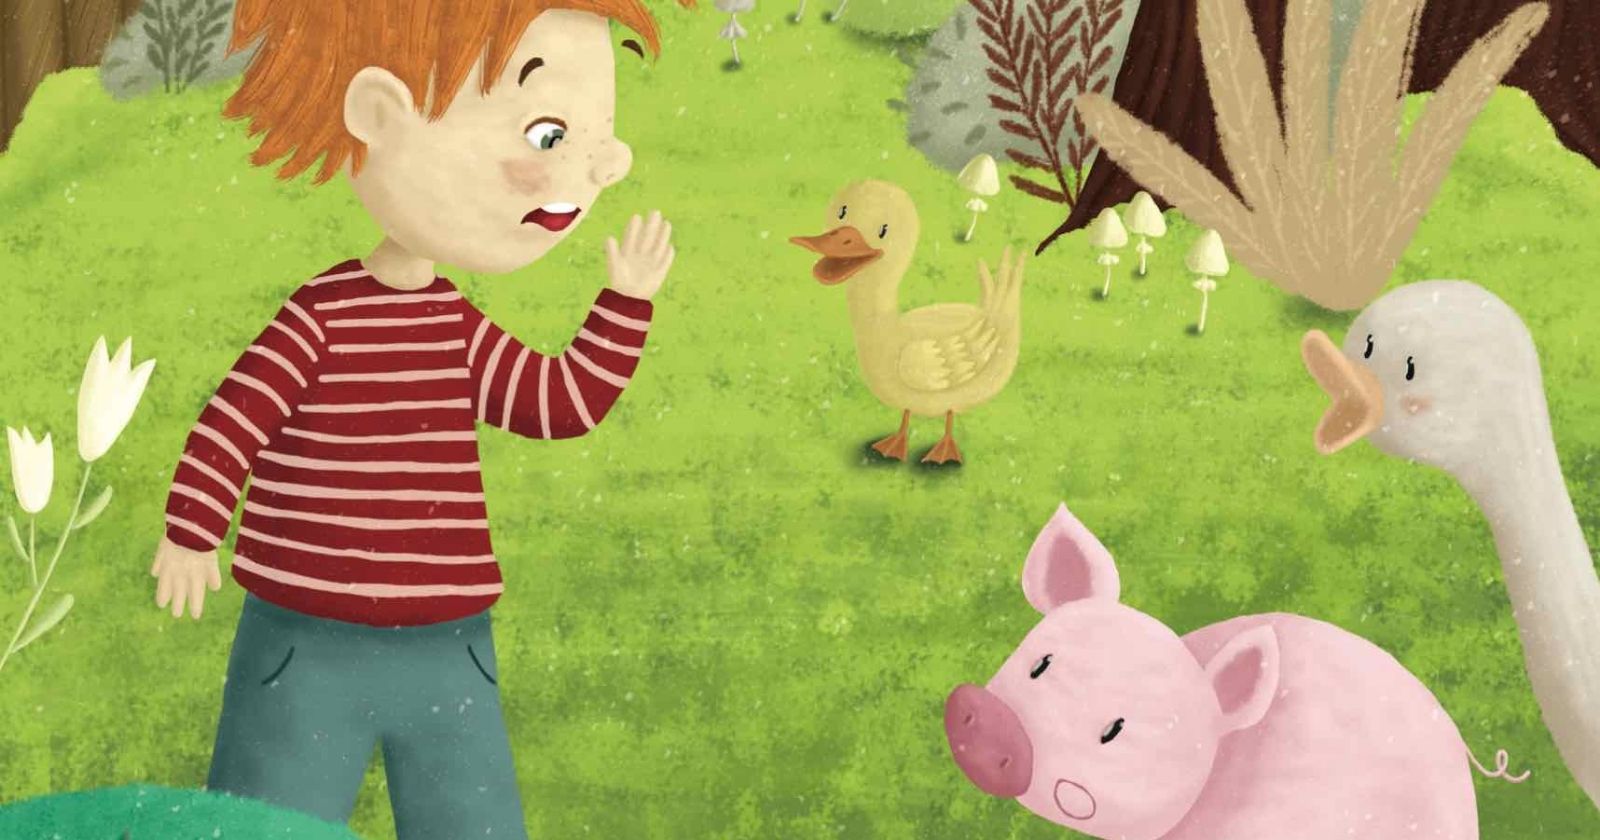 How do you explain veganism to children?  This book lays the foundation from an early age.